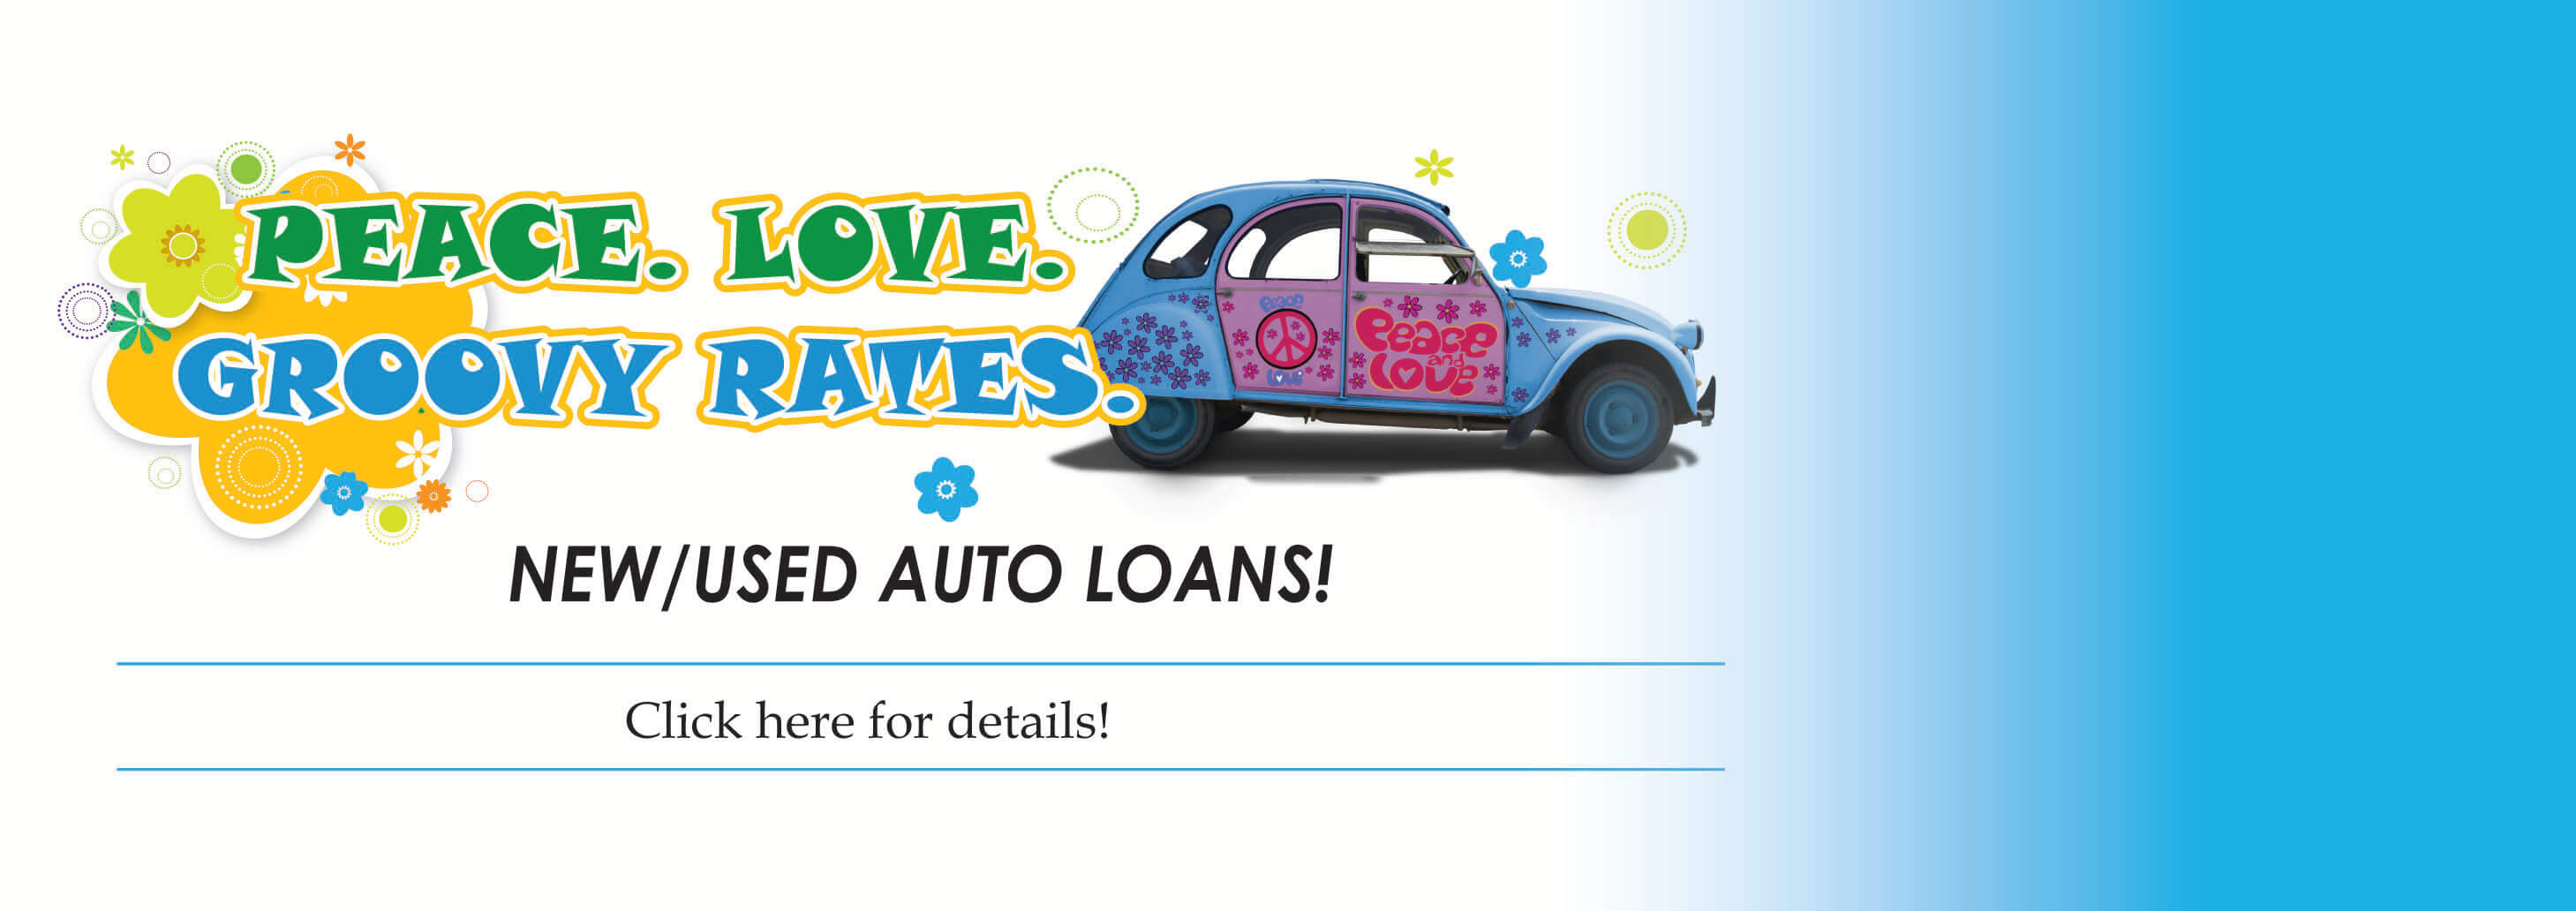 Peace. Love. Groovy Rates New/Used Auto Loans! Click here for details!